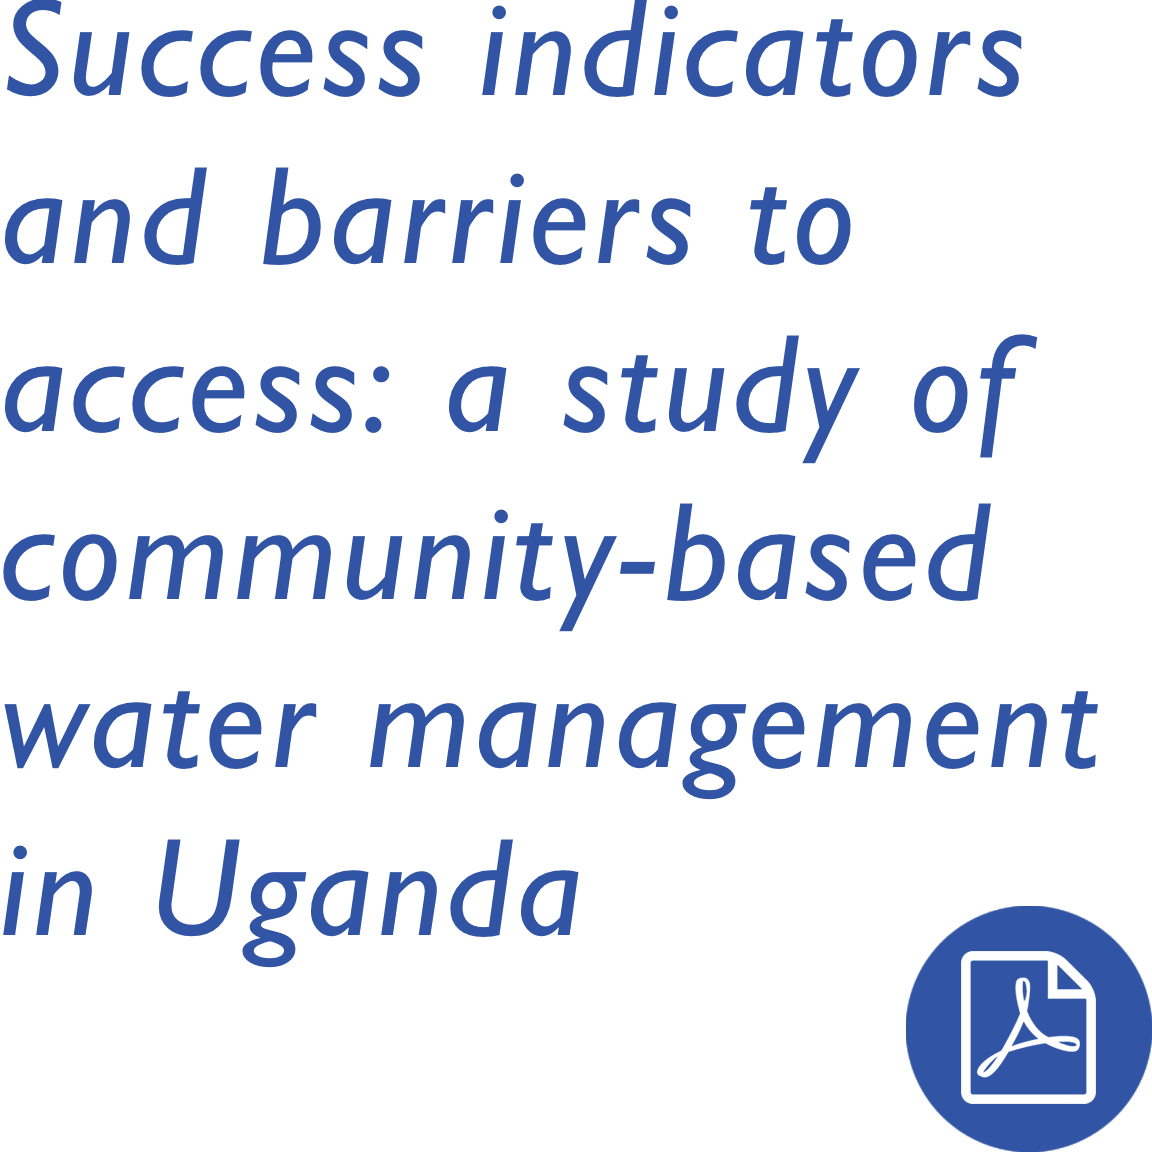 Success indicators and barriers to access: a study of community-based water management in Uganda